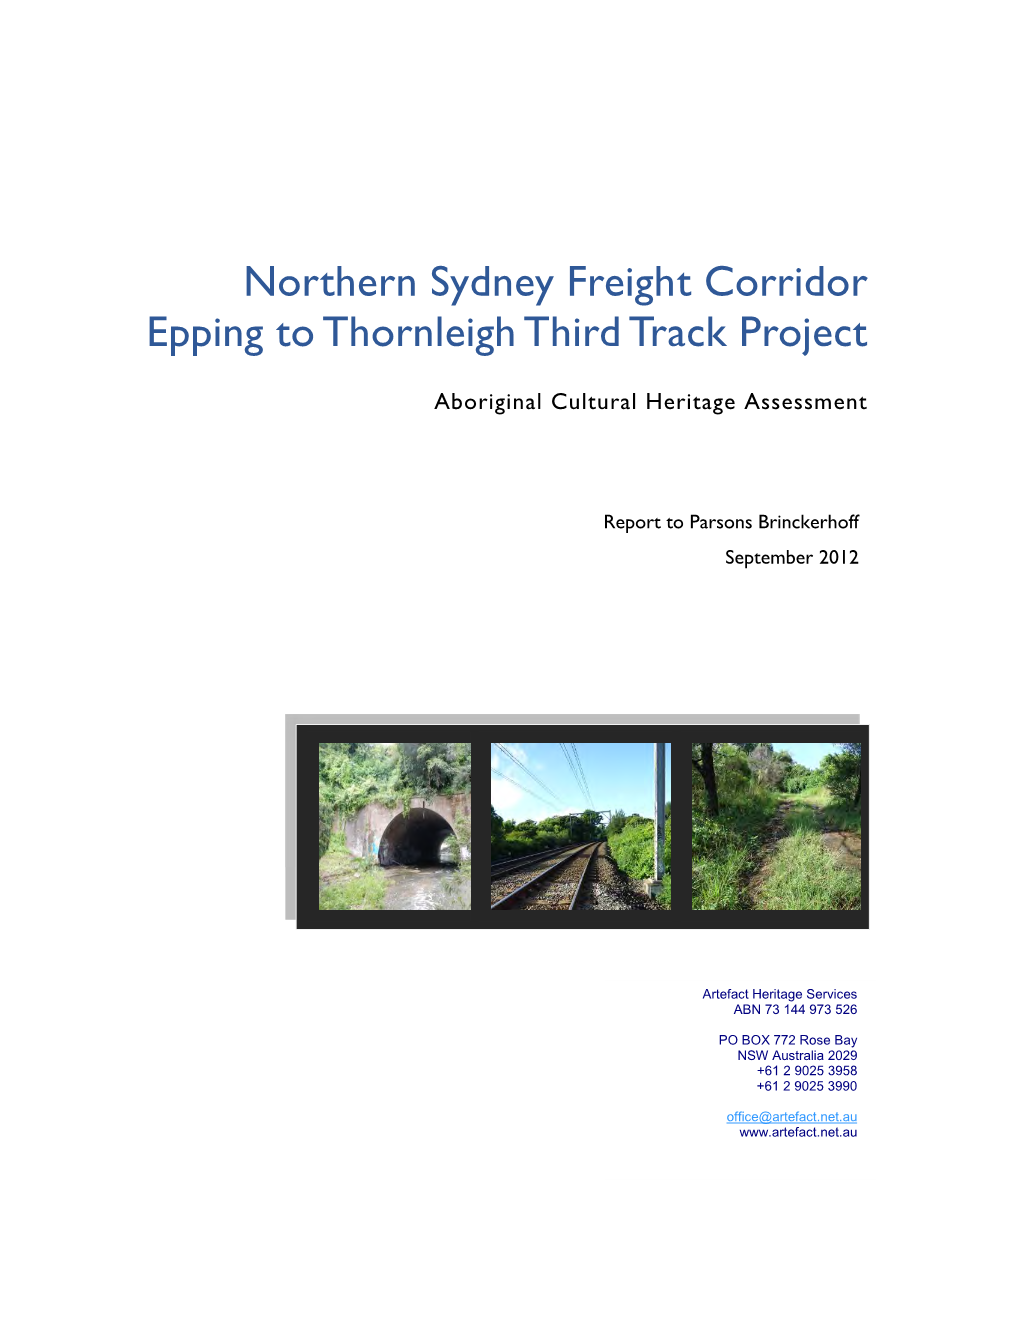 Northern Sydney Freight Corridor Epping to Thornleigh Third Track Project